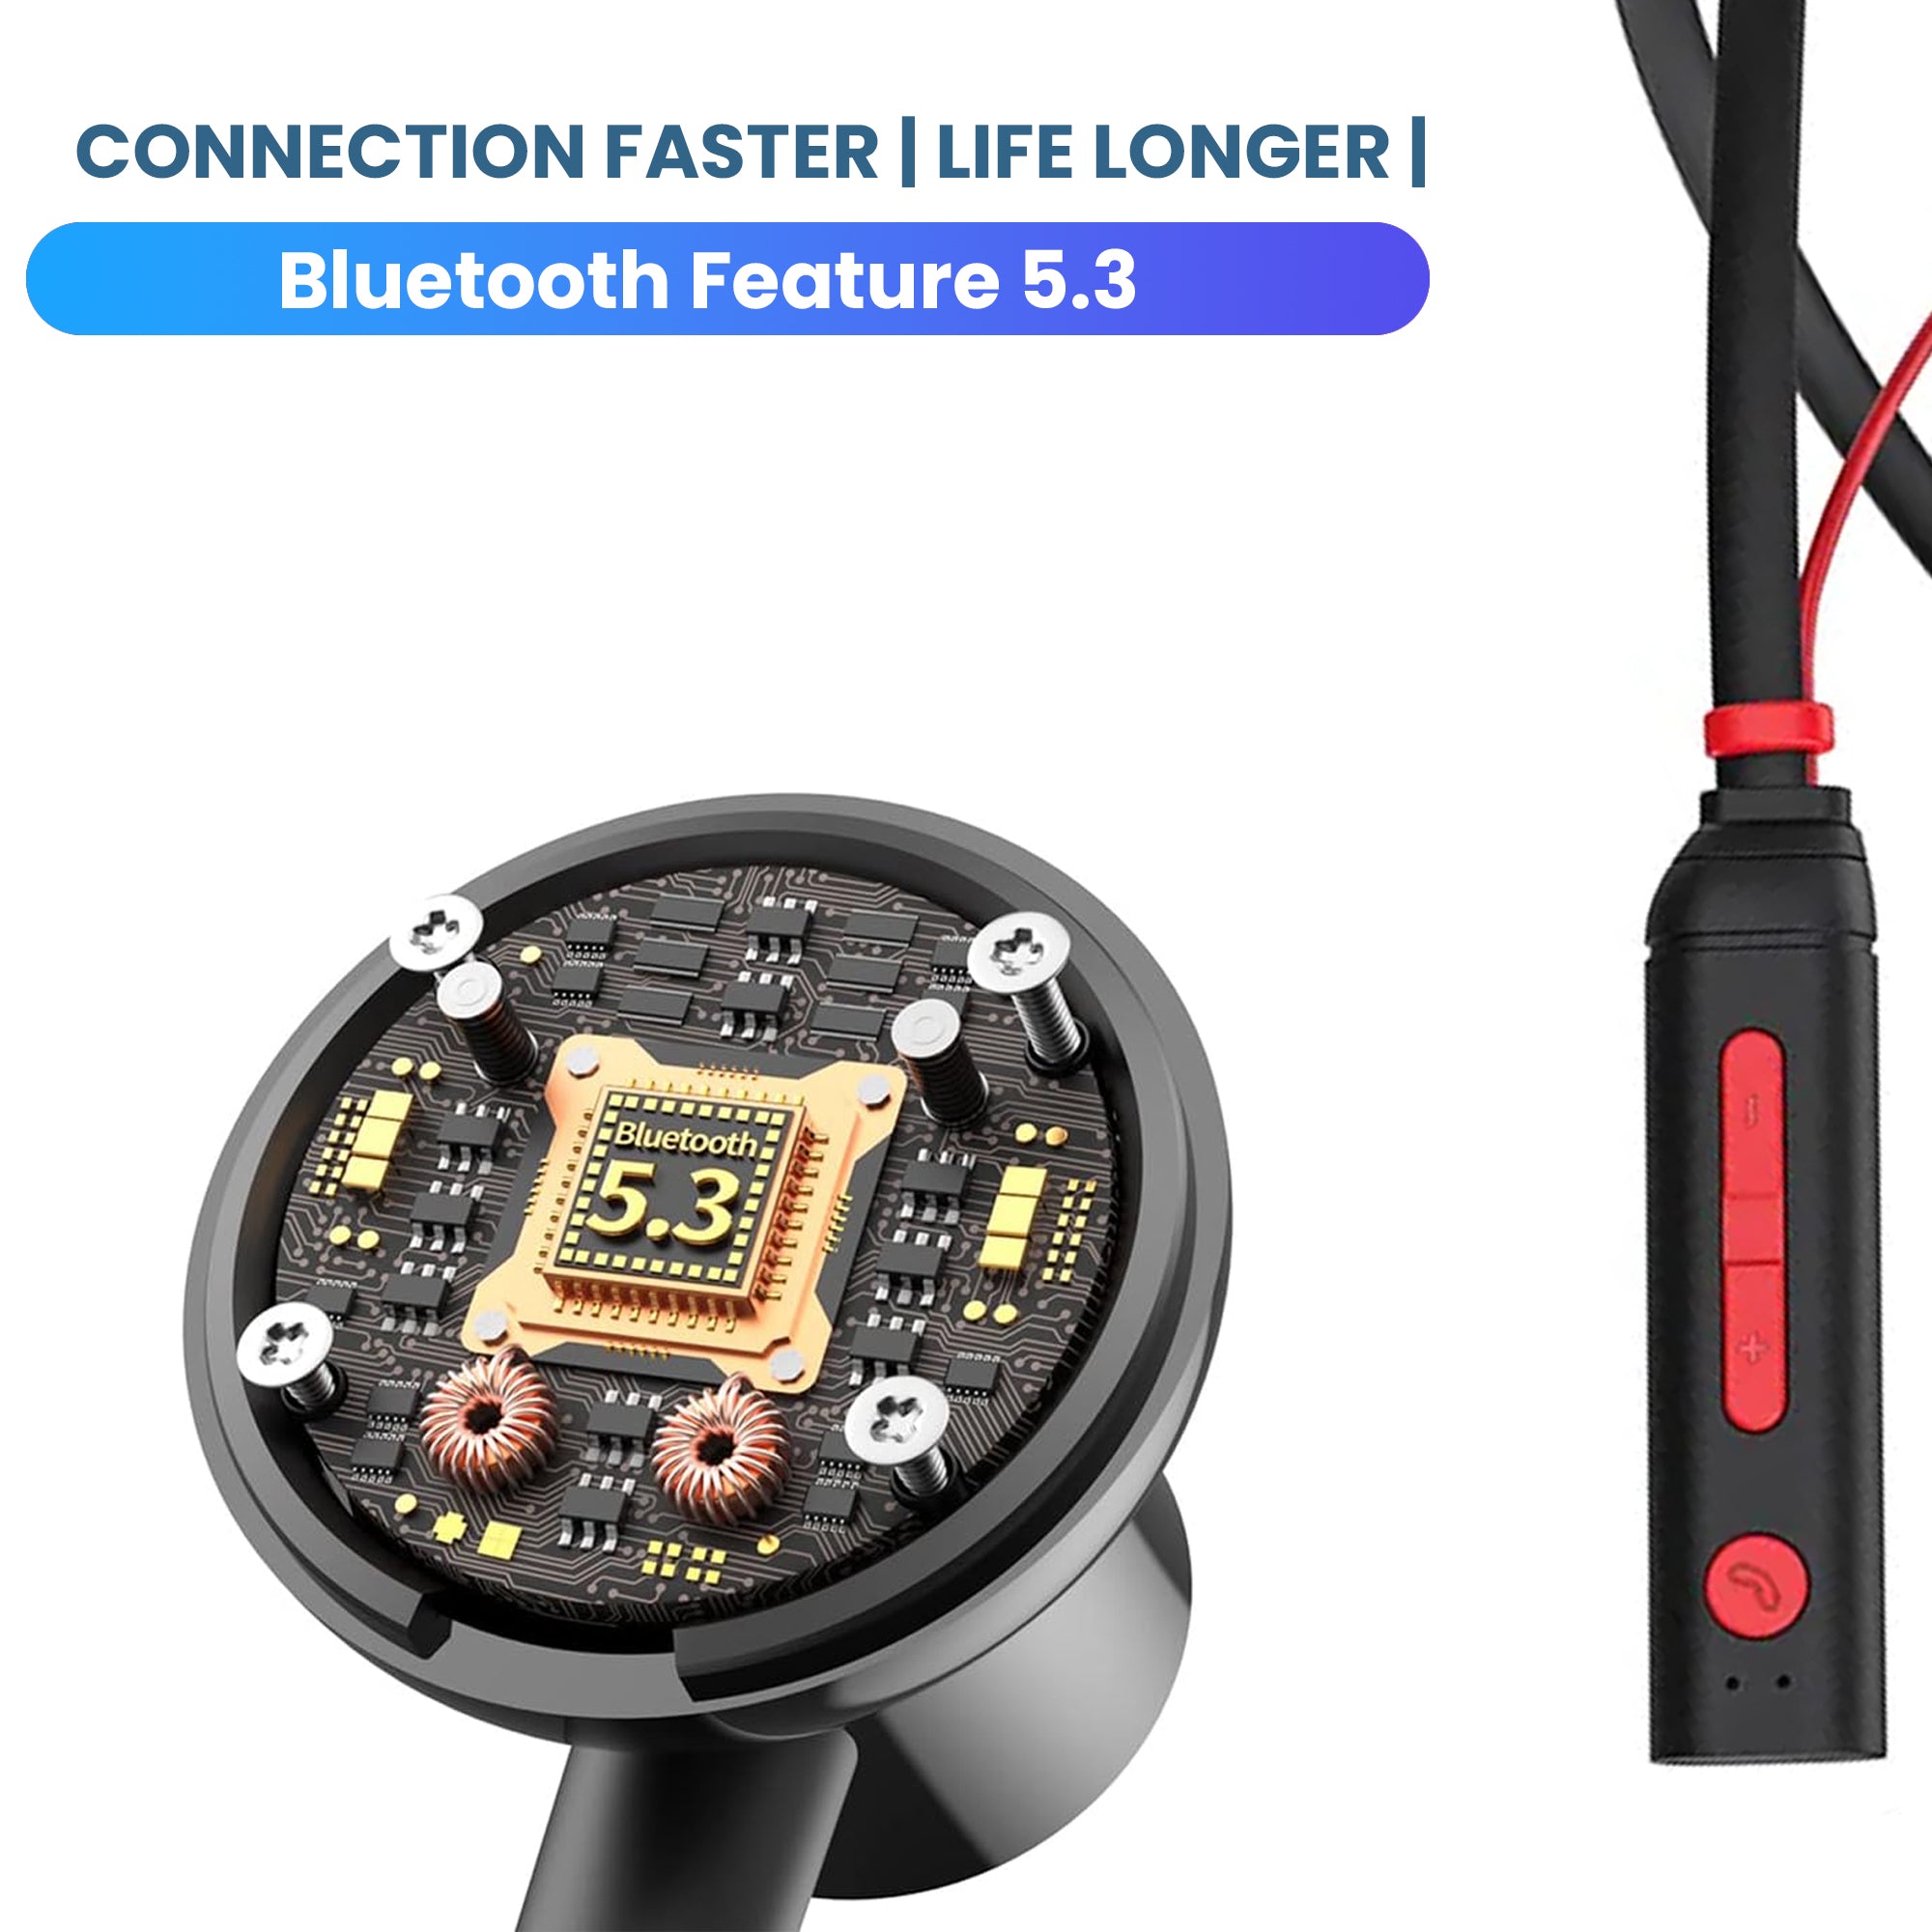 Bluetooth feature of BN 210 V neckbands